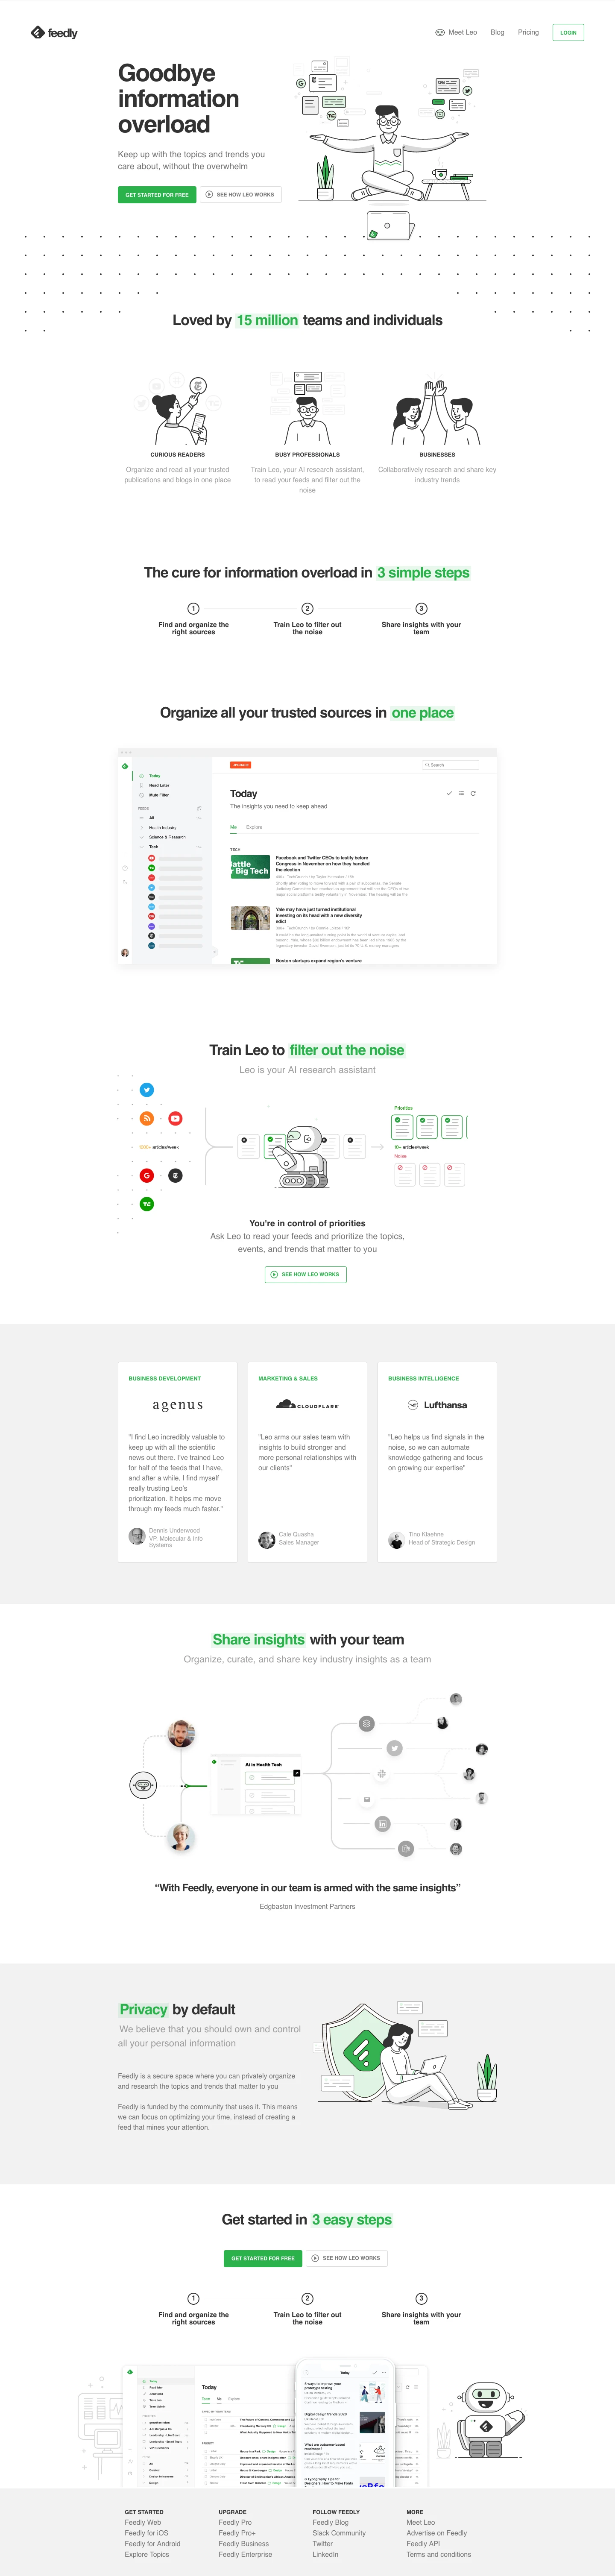 Feedly Landing Page Example: Keep up with the topics and trends you care about, without the overwhelm. Make your research workflow efficient and enjoyable. Experience the power of RSS.